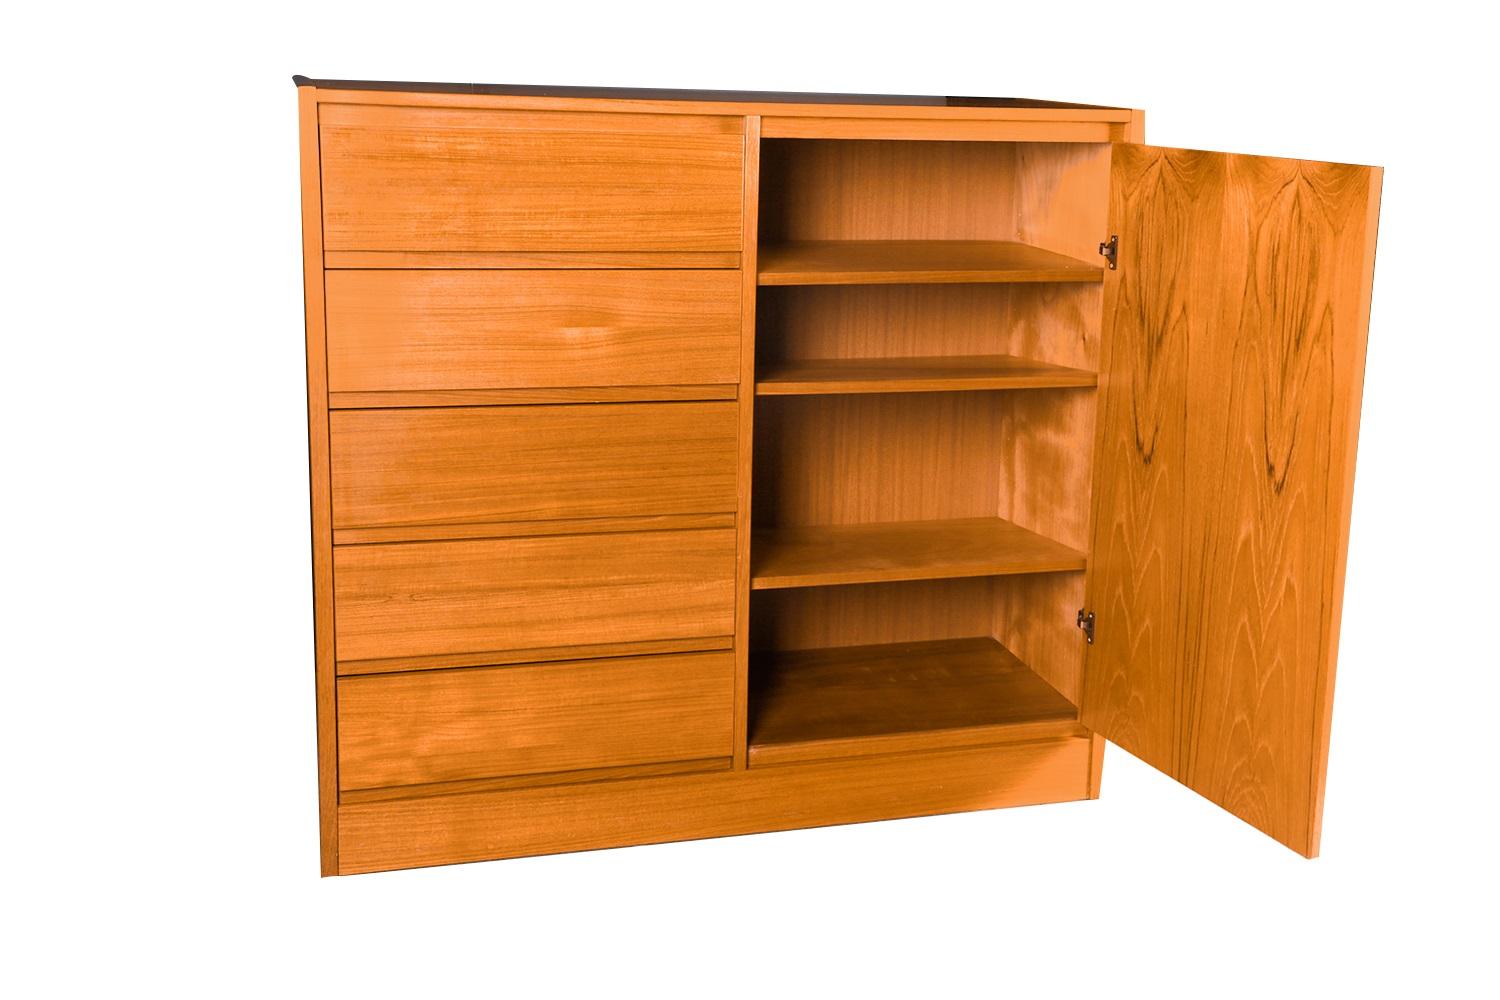 Beautiful Mid-Century Modern highboy, gentleman’s tall dresser, wardrobe, circa 1970's. Don’t be fooled by the term “Gentleman’s Chest” – this high functioning storage piece is really gender neutral, with plenty of storage making it well-suited as a